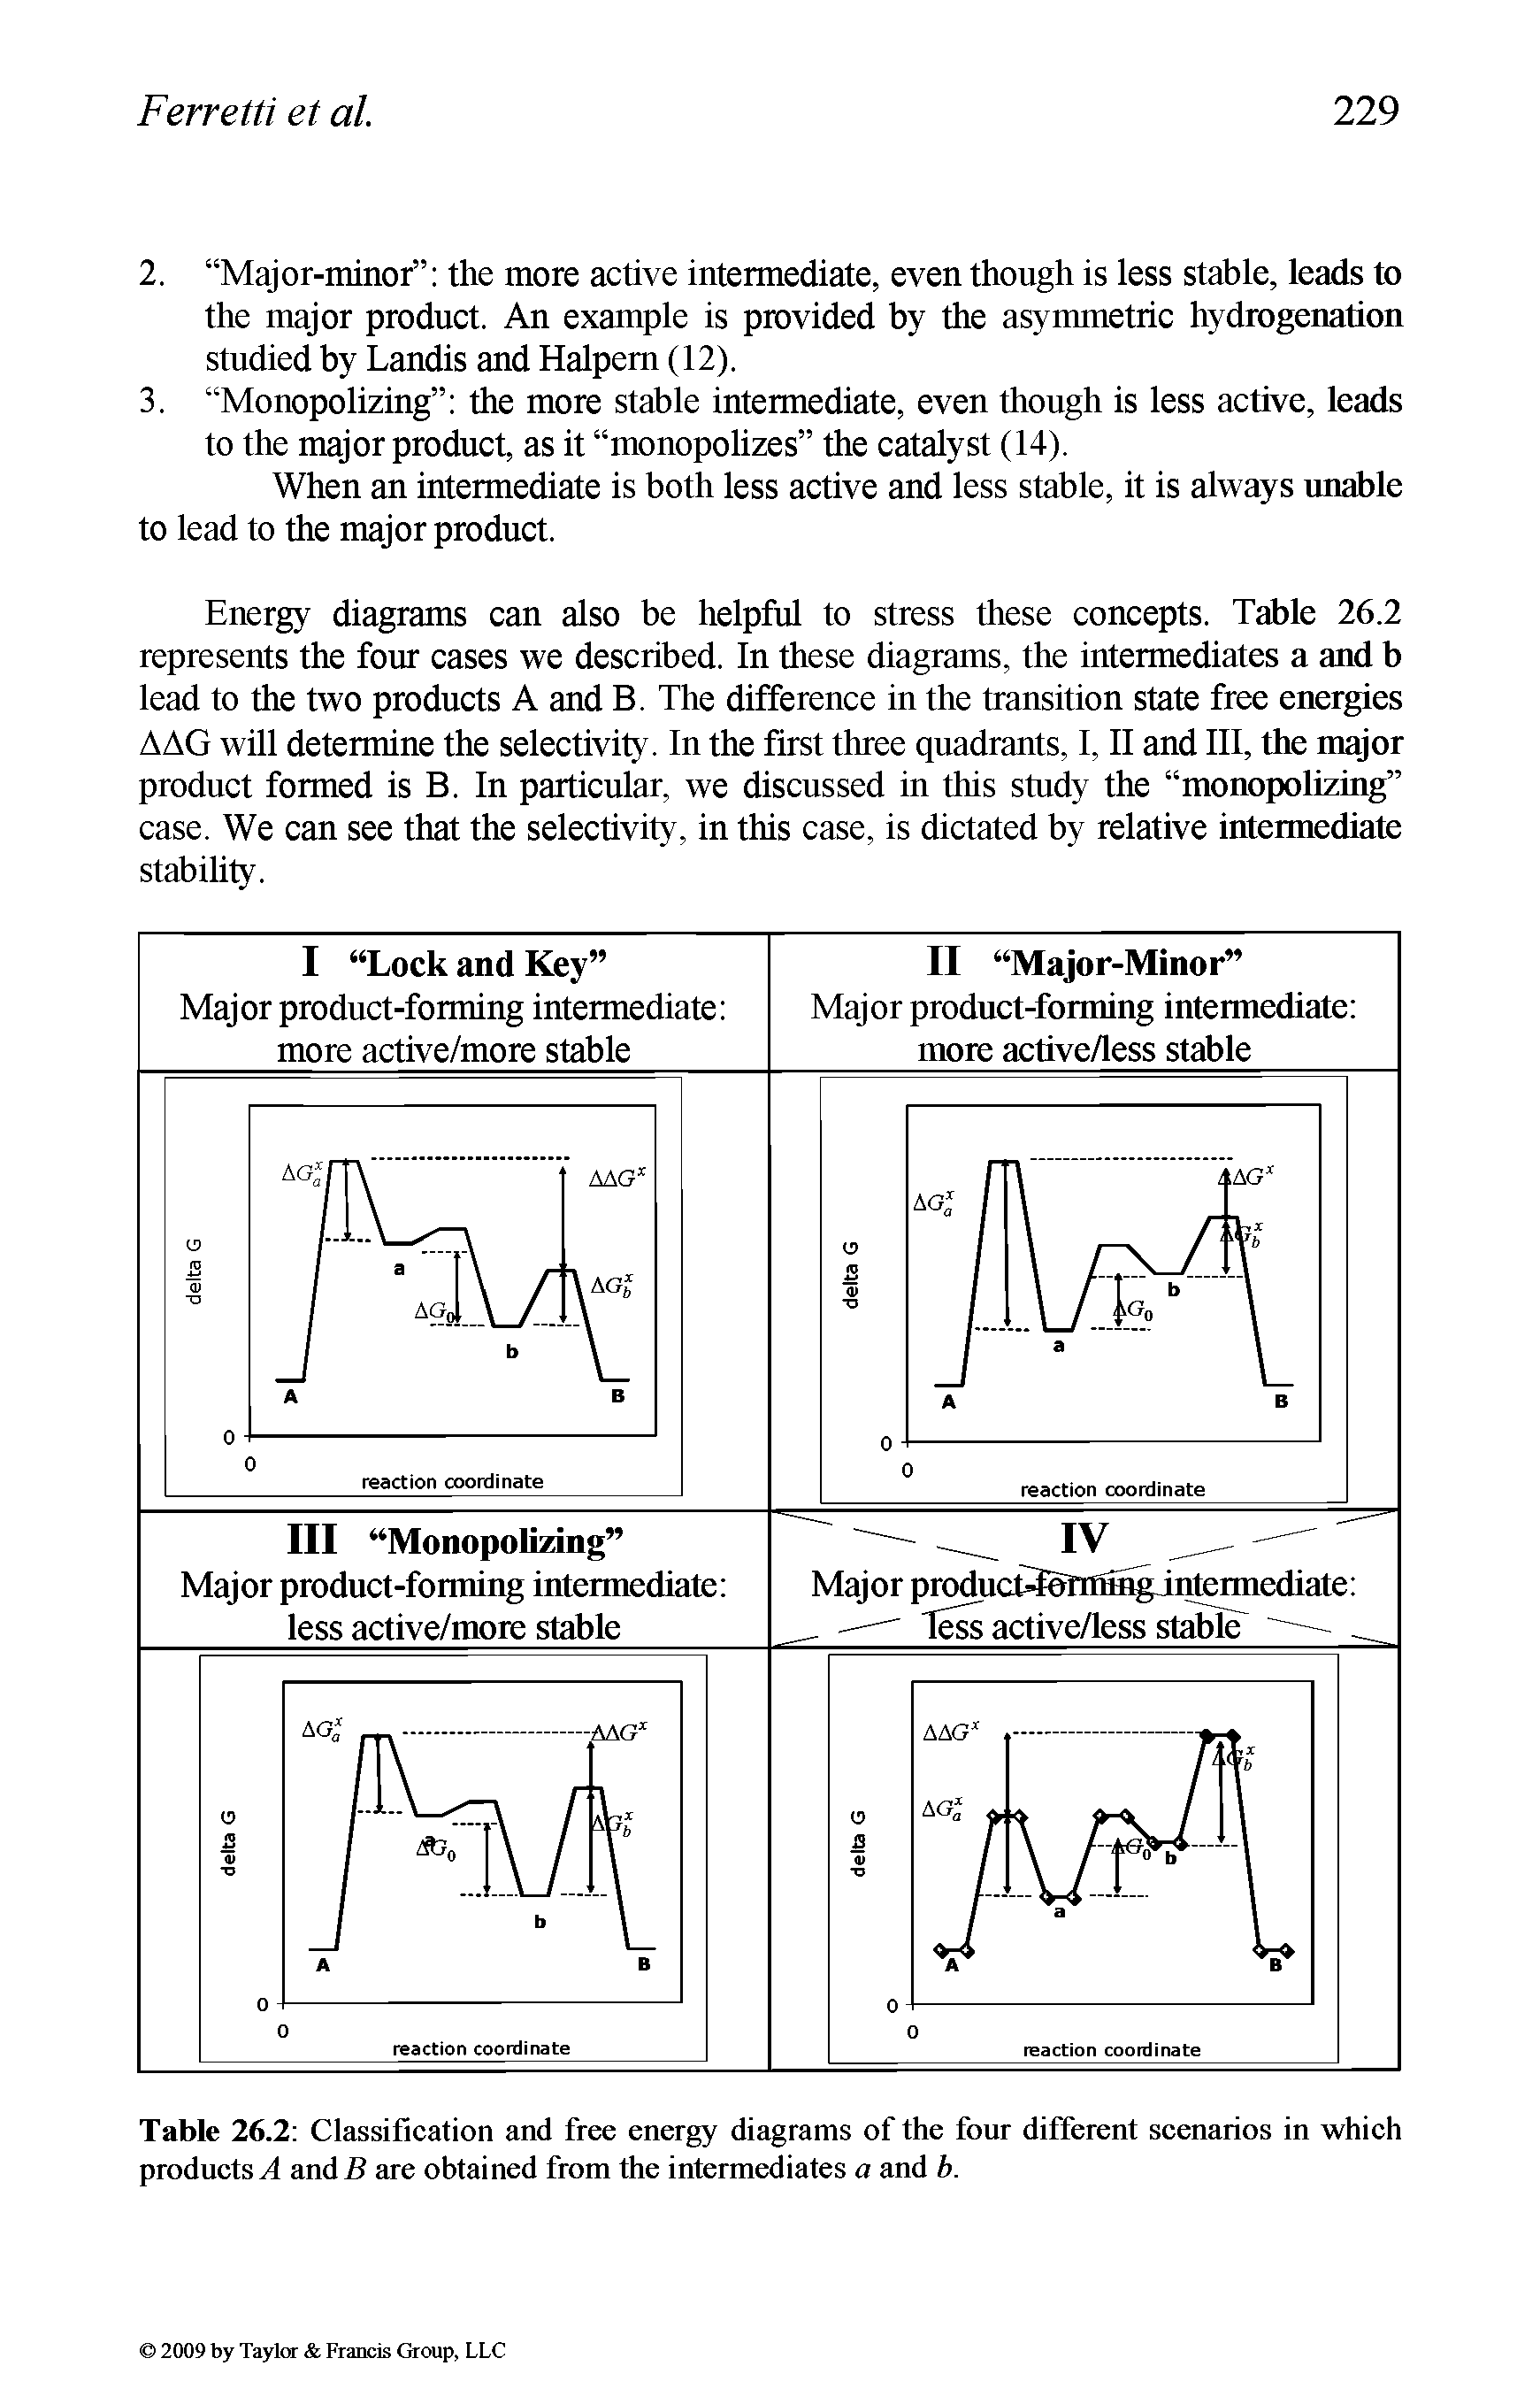 Table 26.2 Classification and free energy diagrams of the four different scenarios in which products andB are obtained from the intermediates a and b.